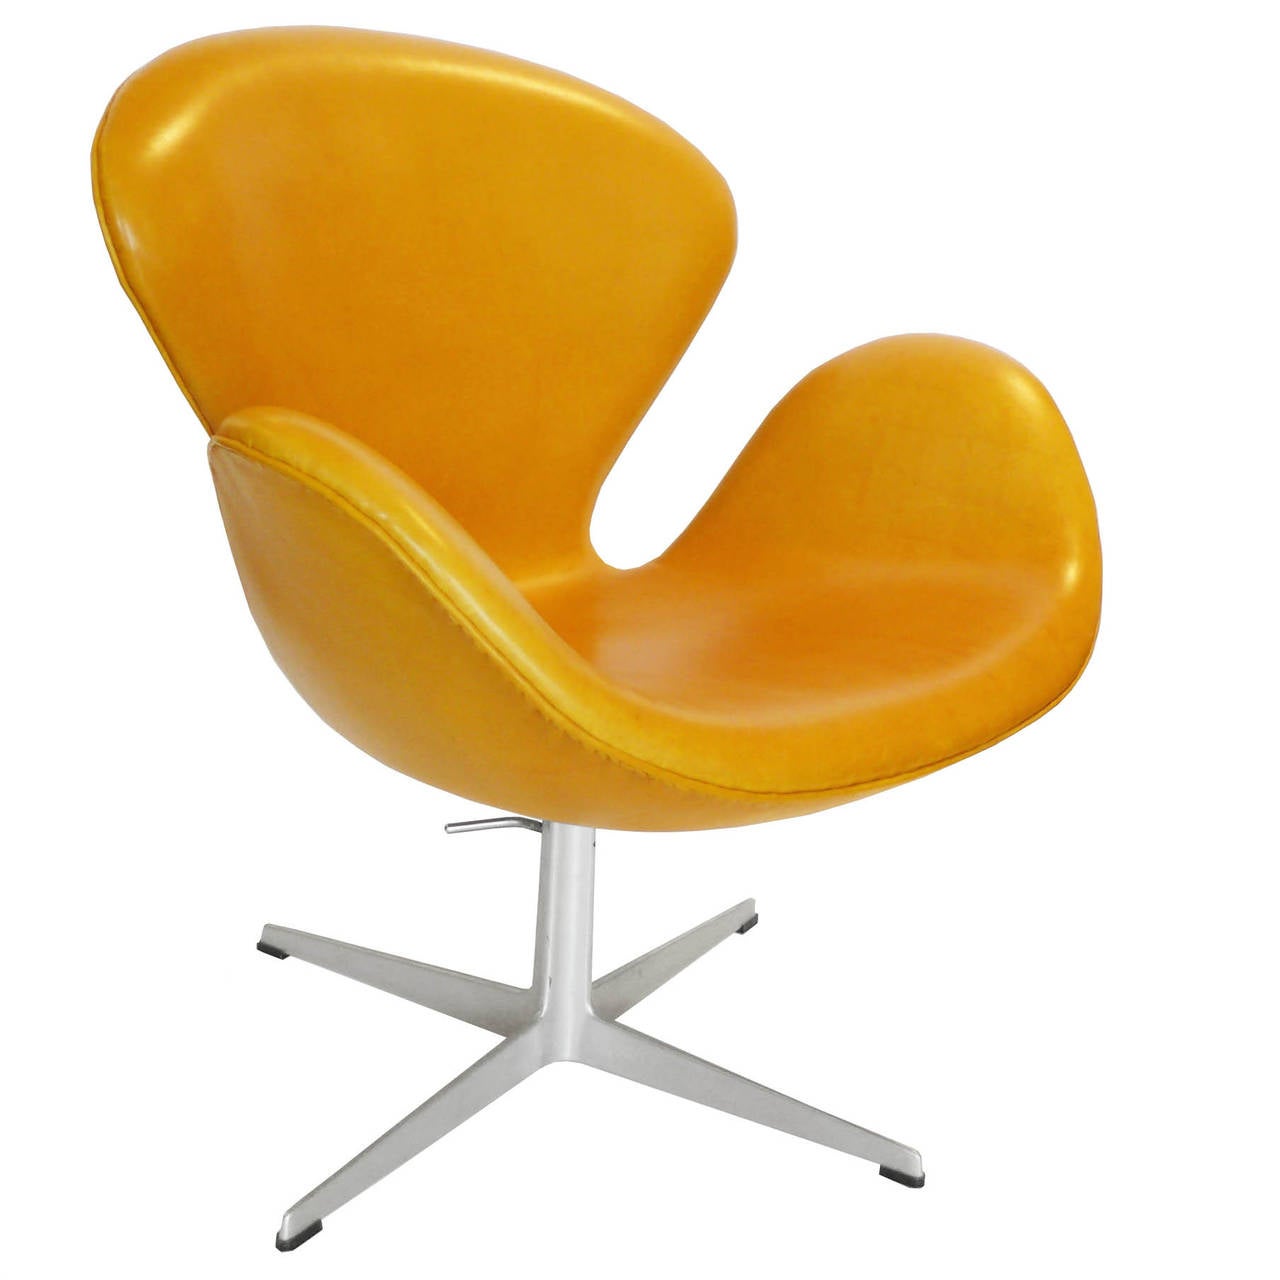 Scandinavian Modern Early Rare Adjustable Swan Chair by Arne Jacobsen in Saddle Tan Leather